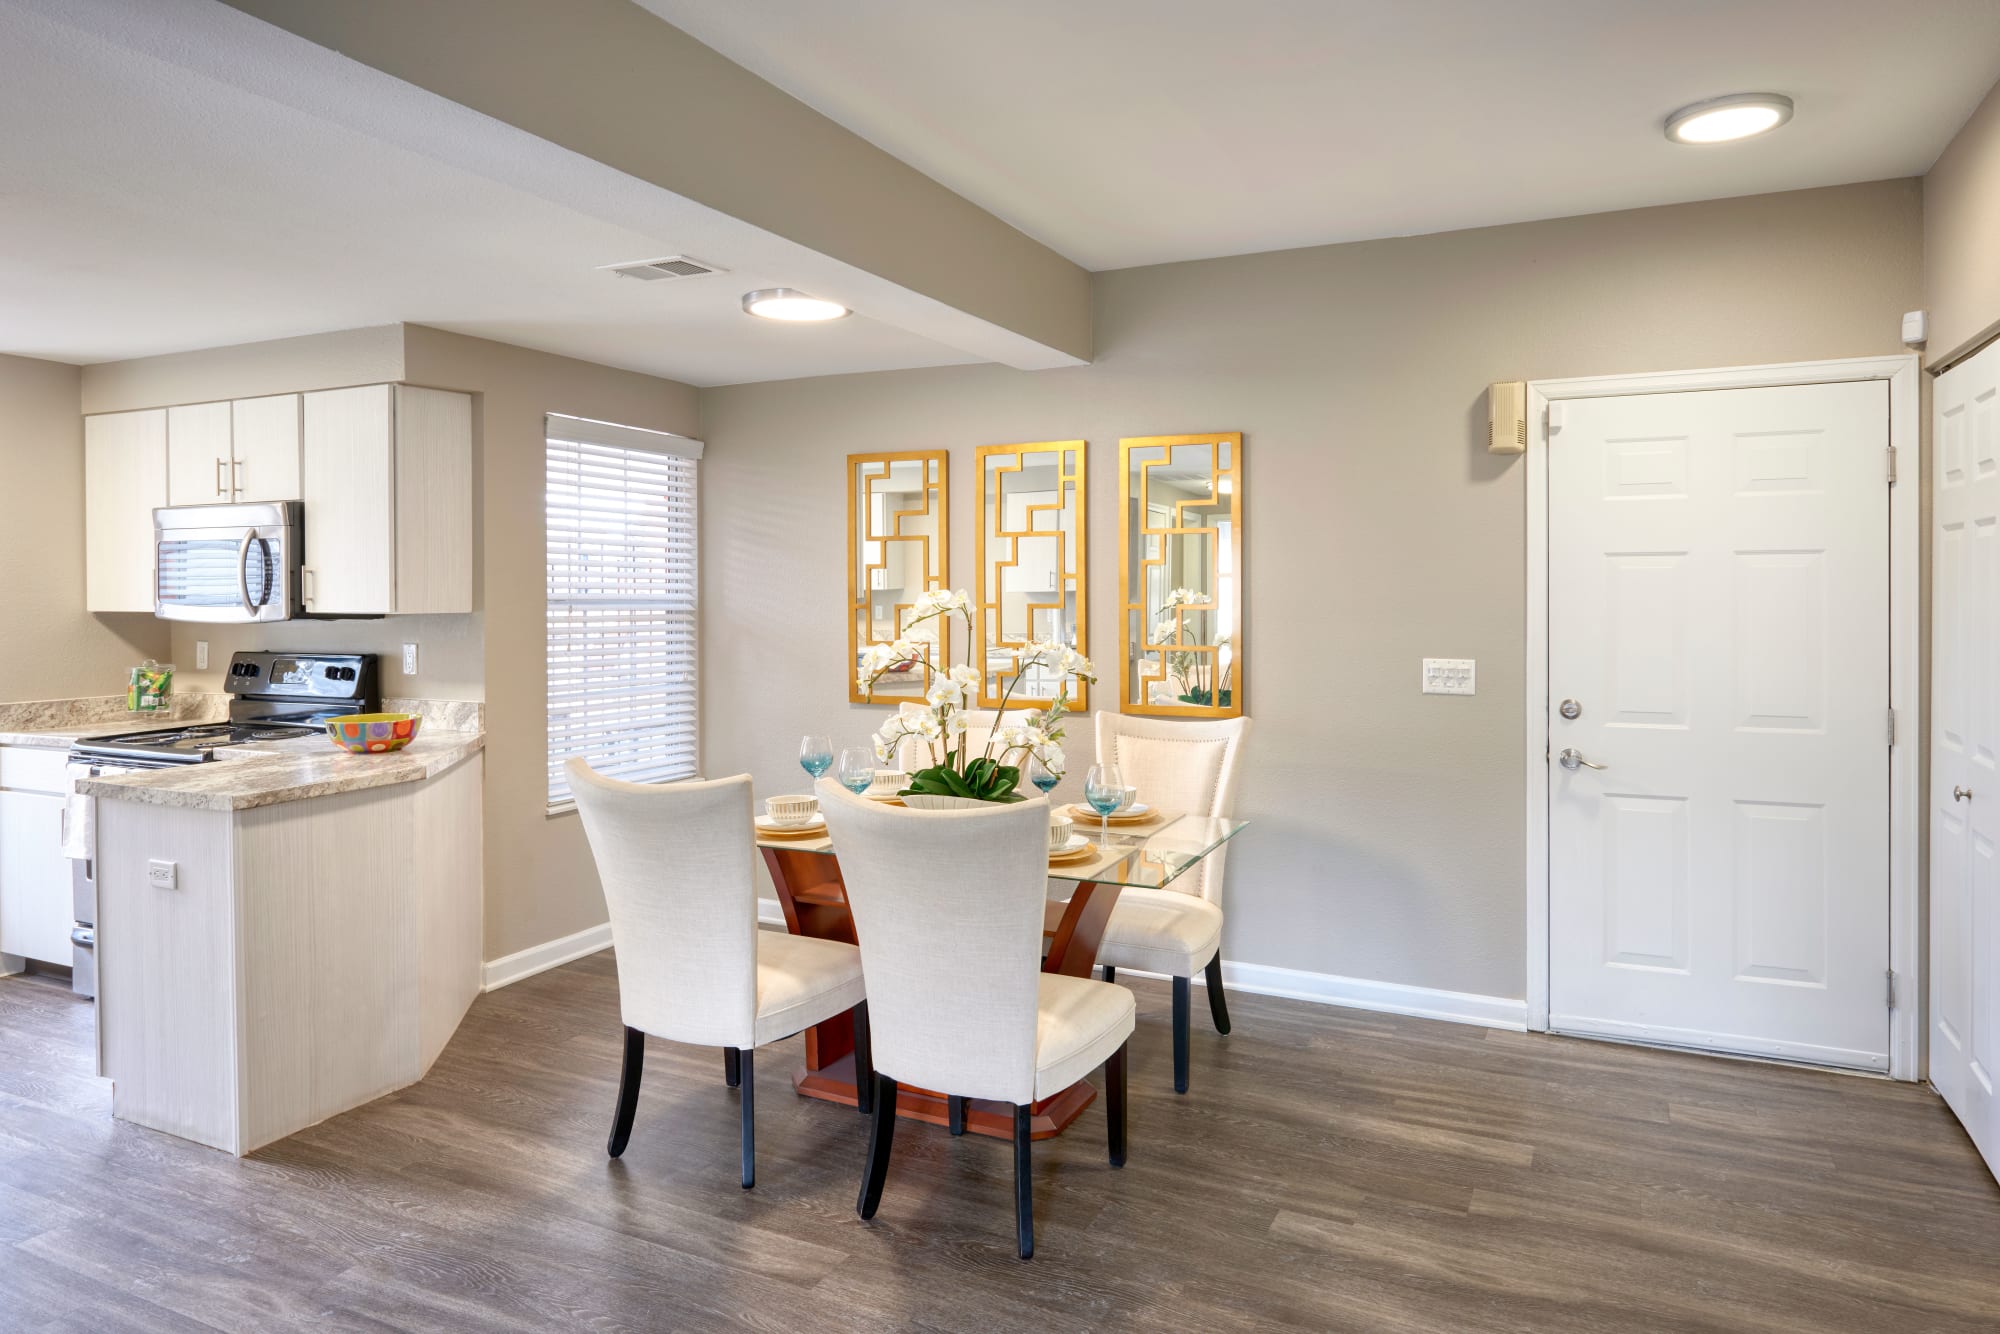 Furnished dining room at Villas at Homestead Apartments in Englewood, Colorado